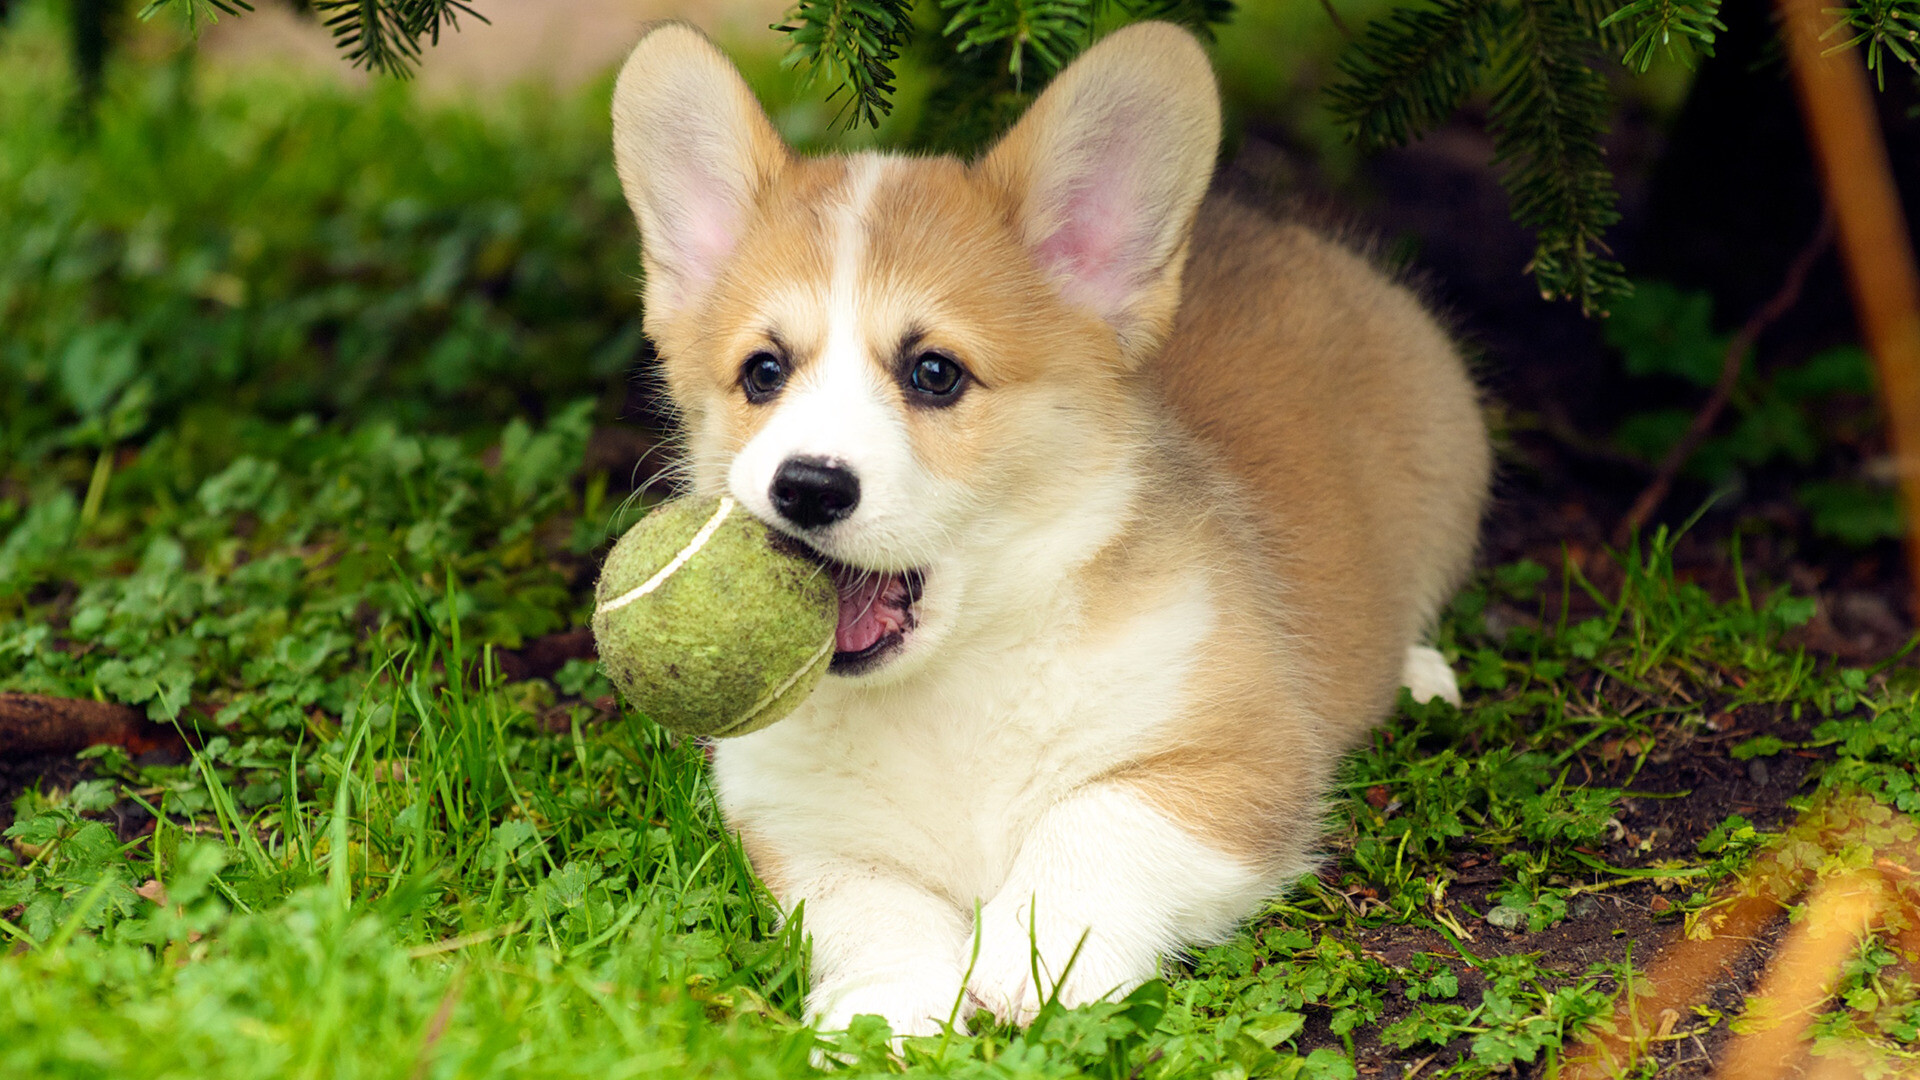 Corgi: Dog, Puppies, The breed has short but powerful legs, muscular thighs, and a deep chest. 1920x1080 Full HD Background.